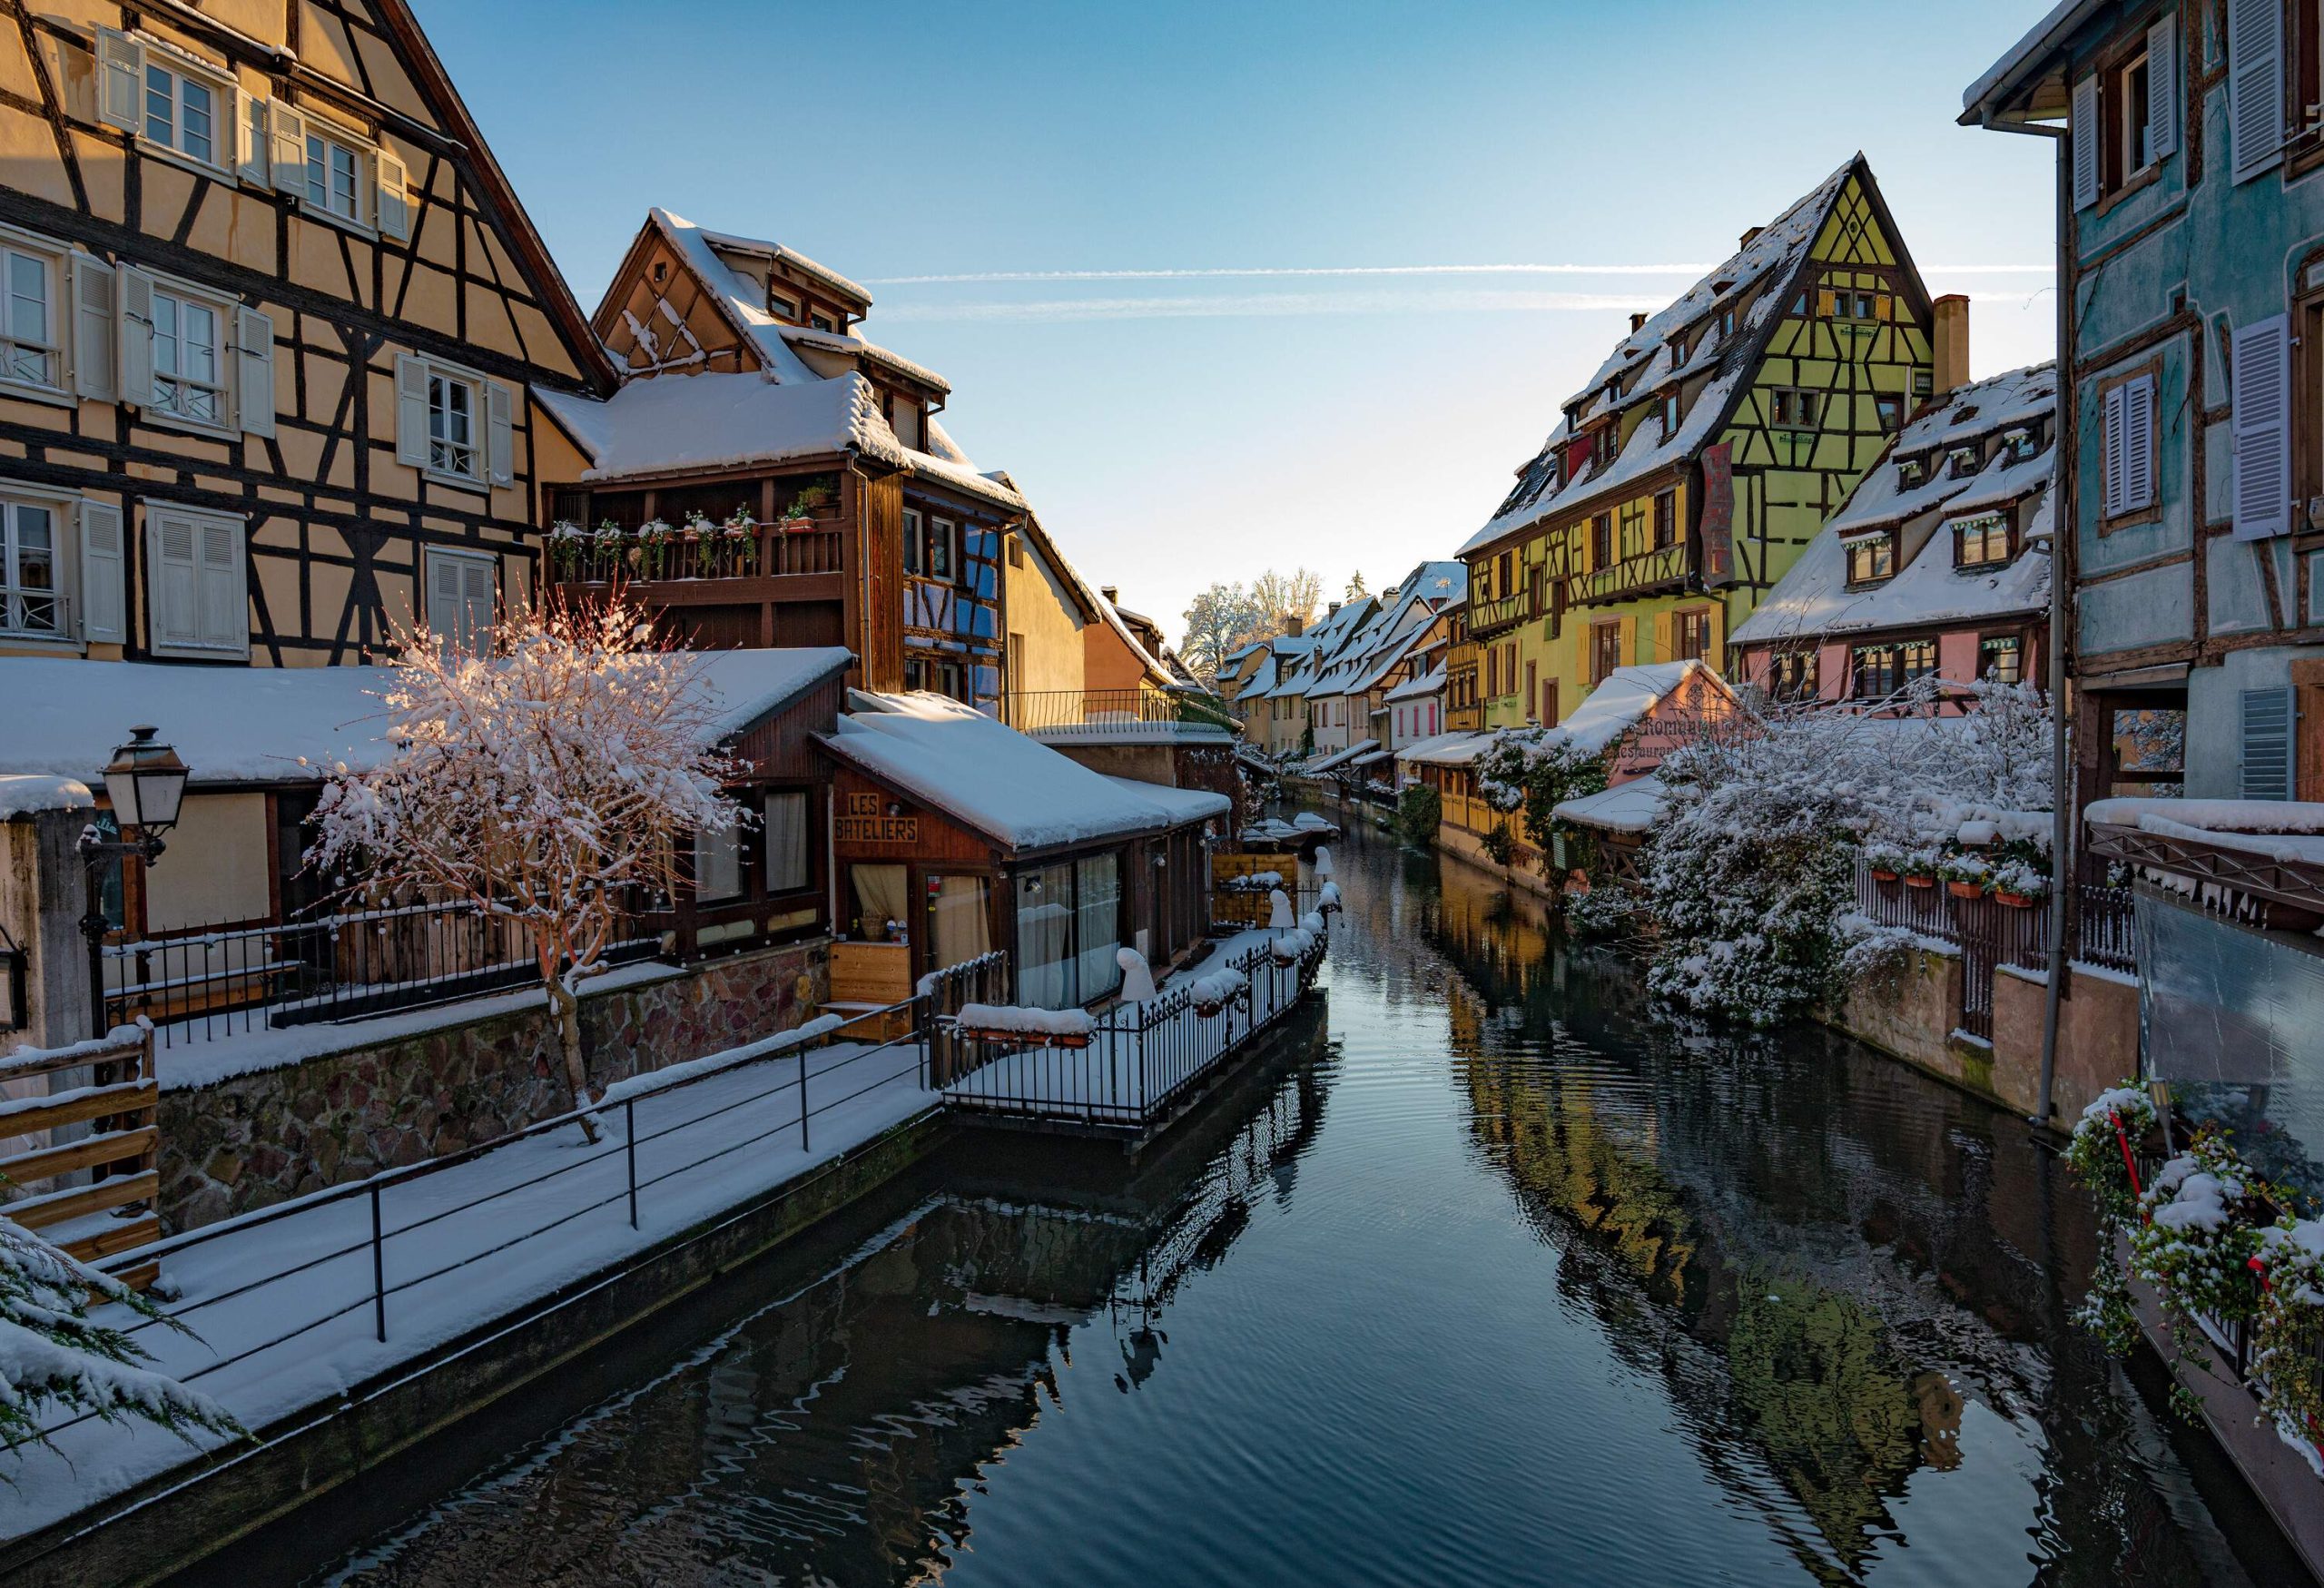 dest_france_alsace_colmar_winter_snow_gettyimages-1297057647_universal_within-usage-period_92761